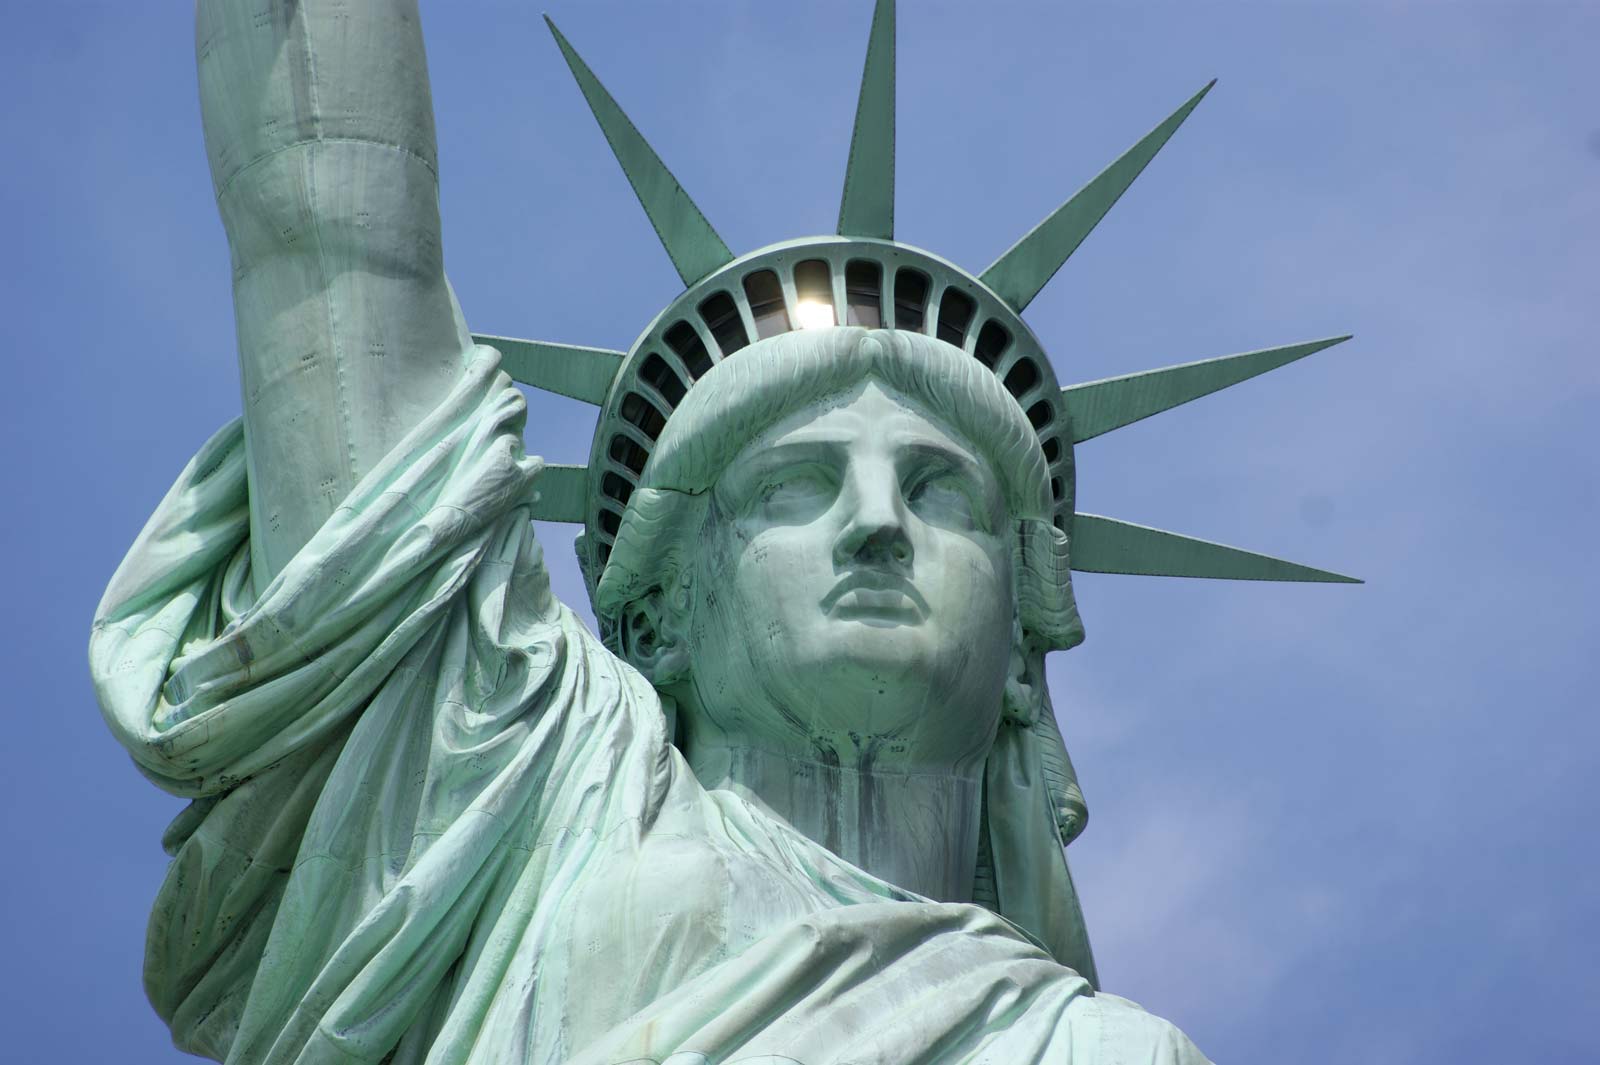 Disappointing Tourist Destinations - Statue of Liberty